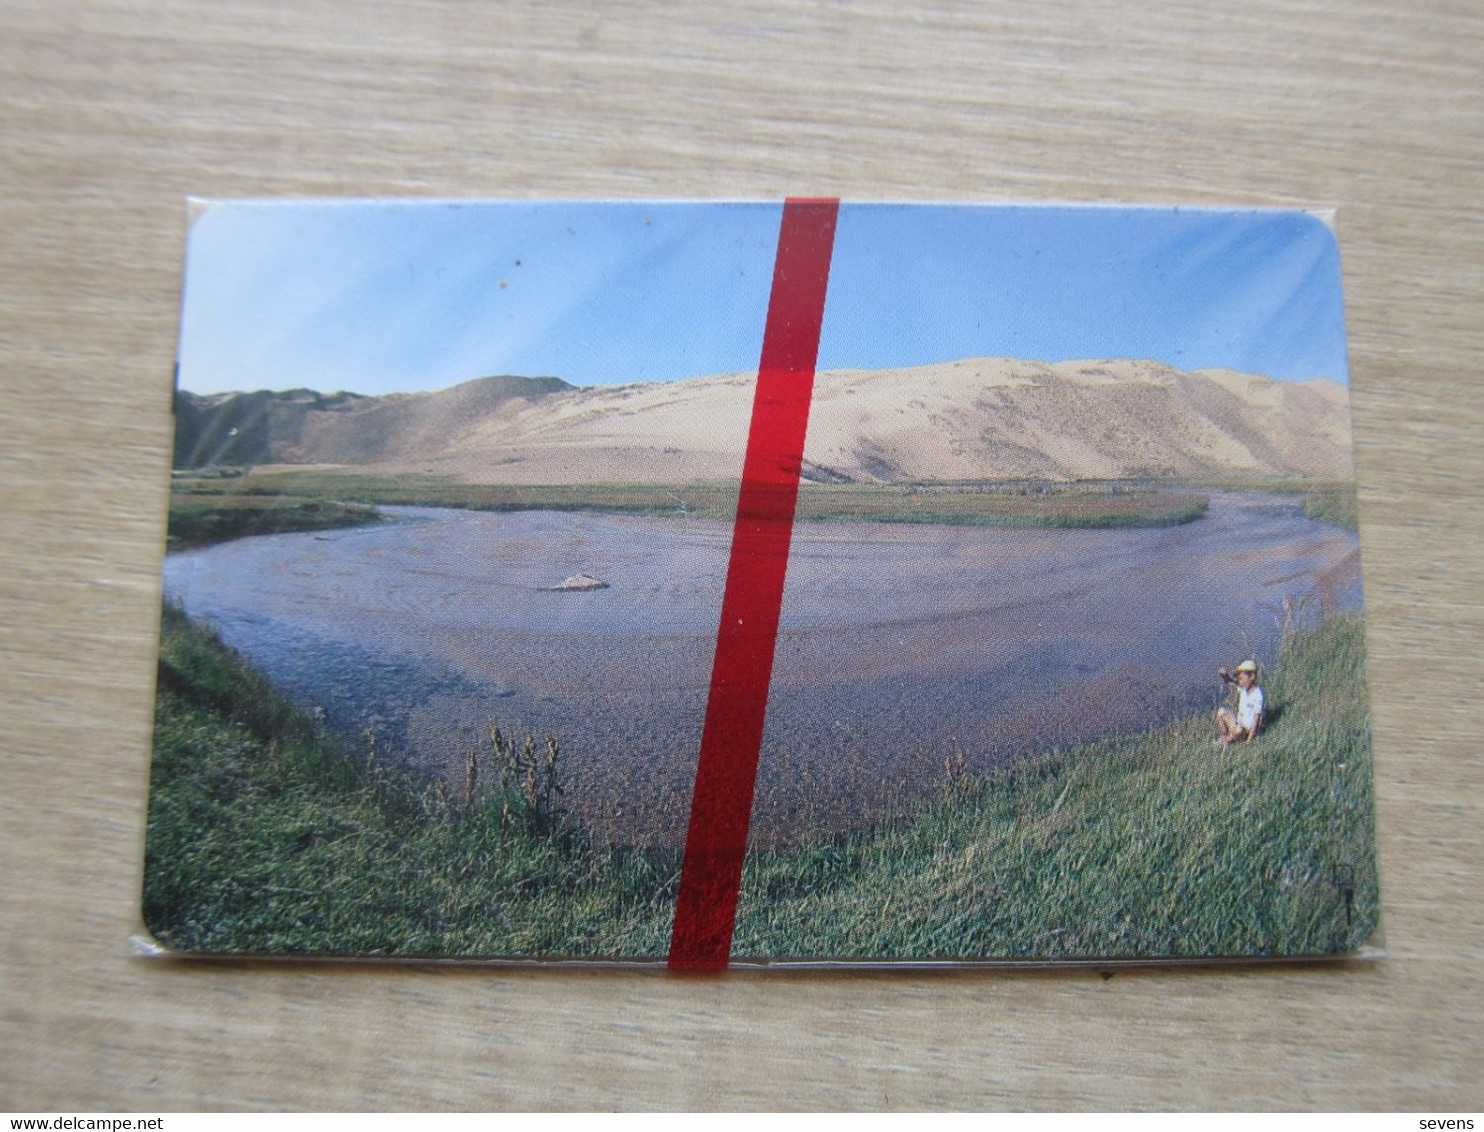 Mon-02 First Issued Chip Card, Child By Lake, 150units, GEM1 Chip,mint In Blister - Mongolia